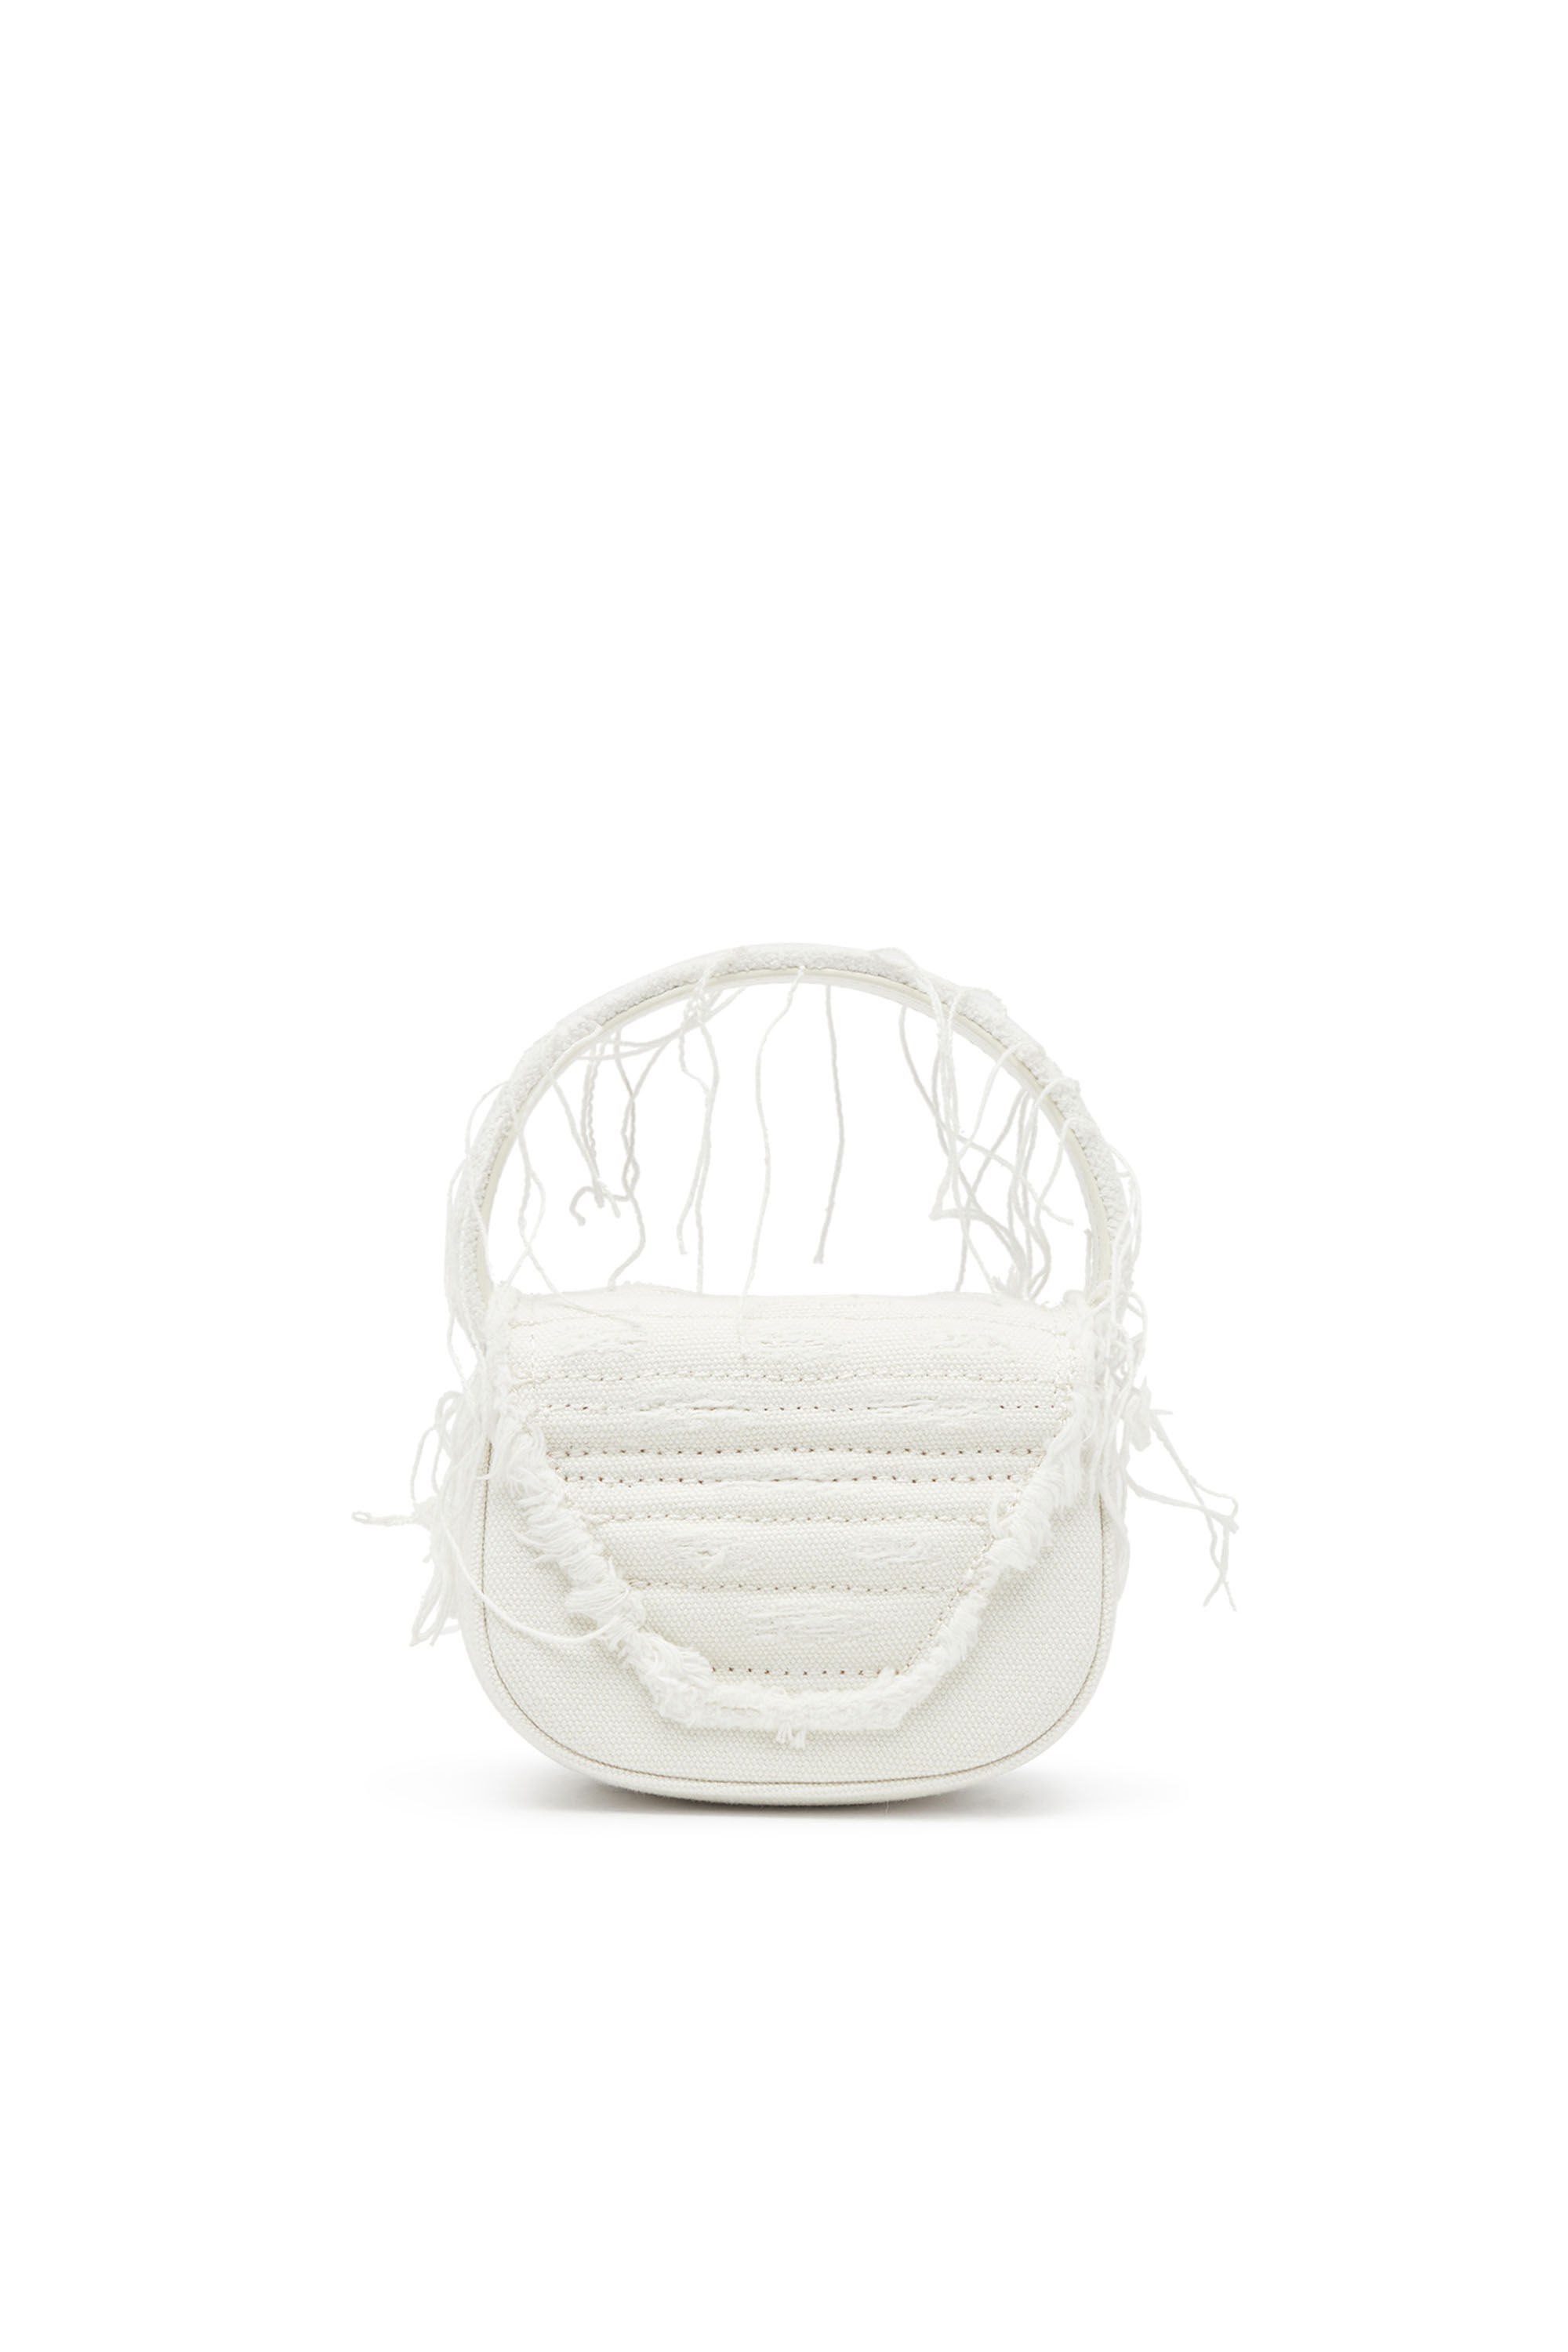 Diesel - 1DR XS, Woman 1DR XS-Iconic mini bag in canvas and leather in White - Image 3